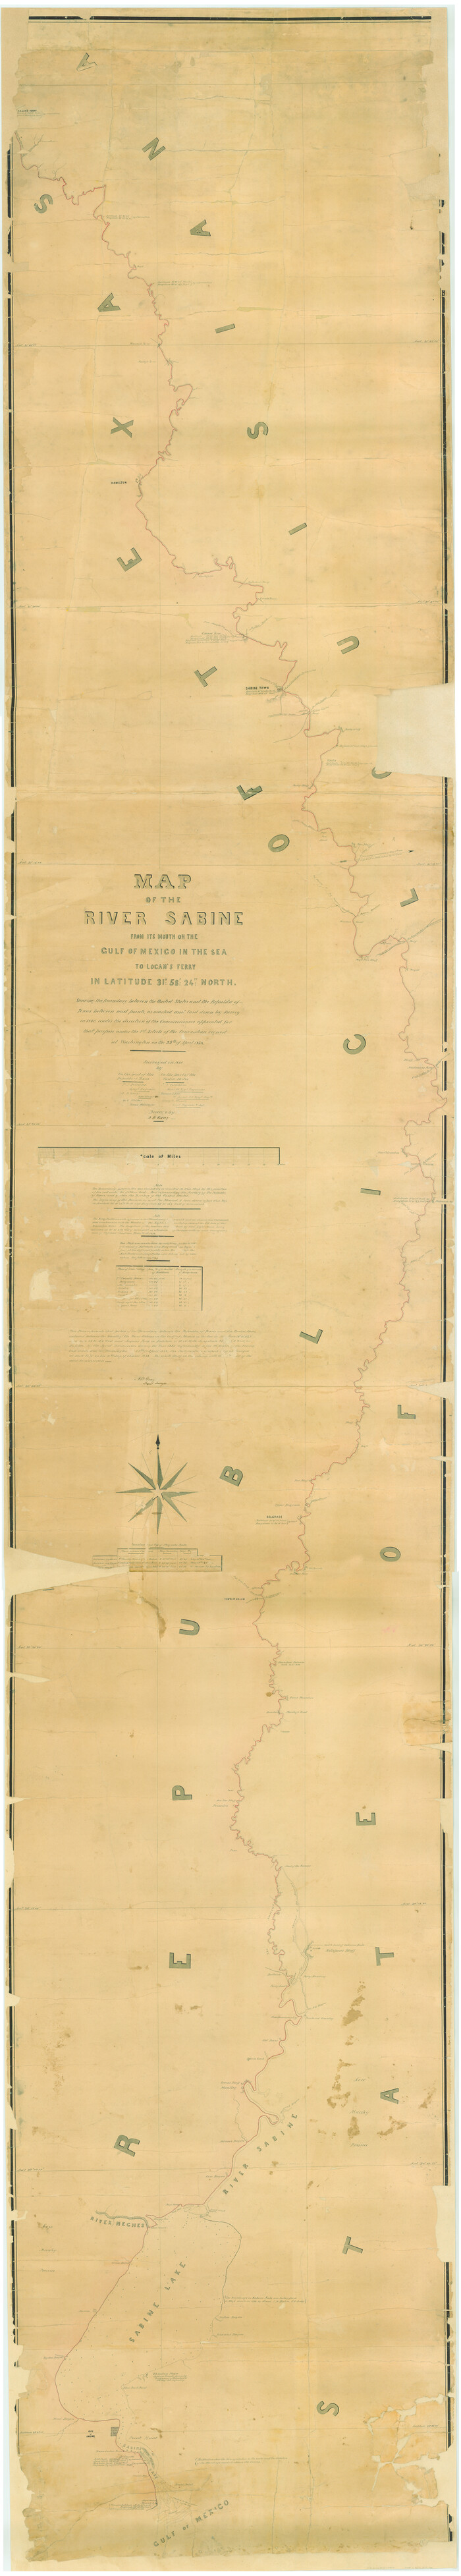 1744, Map of the River Sabine from its mouth on the Gulf of Mexico in the Sea to Logan's Ferry in Latitude 31°58'24" North, General Map Collection